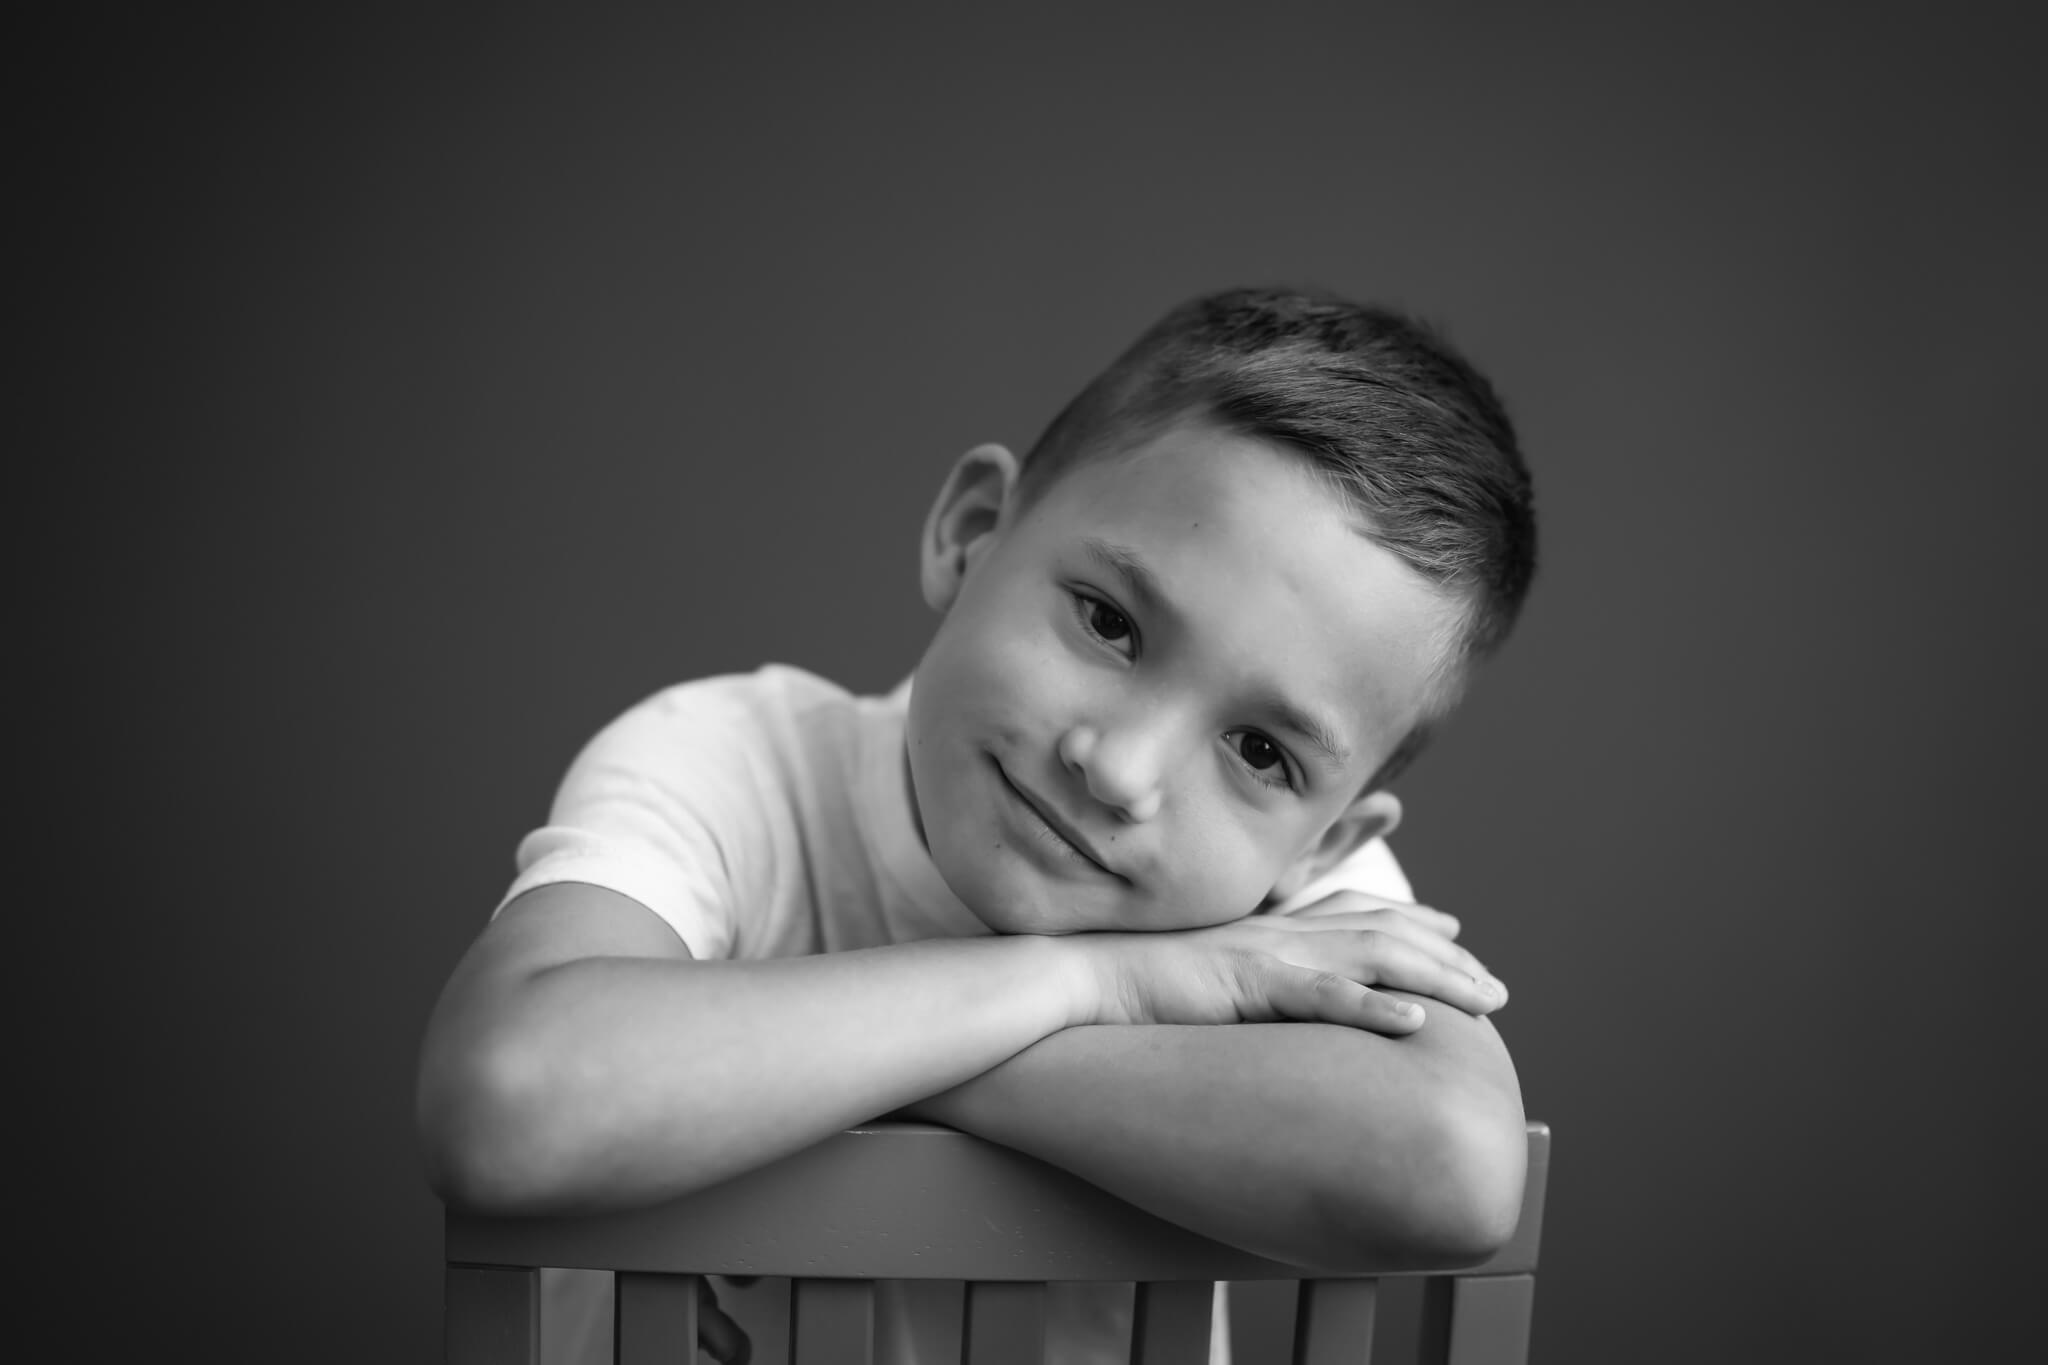 8 year old boy in black and white studio portrait leaning over hair back with arms crossed and head down